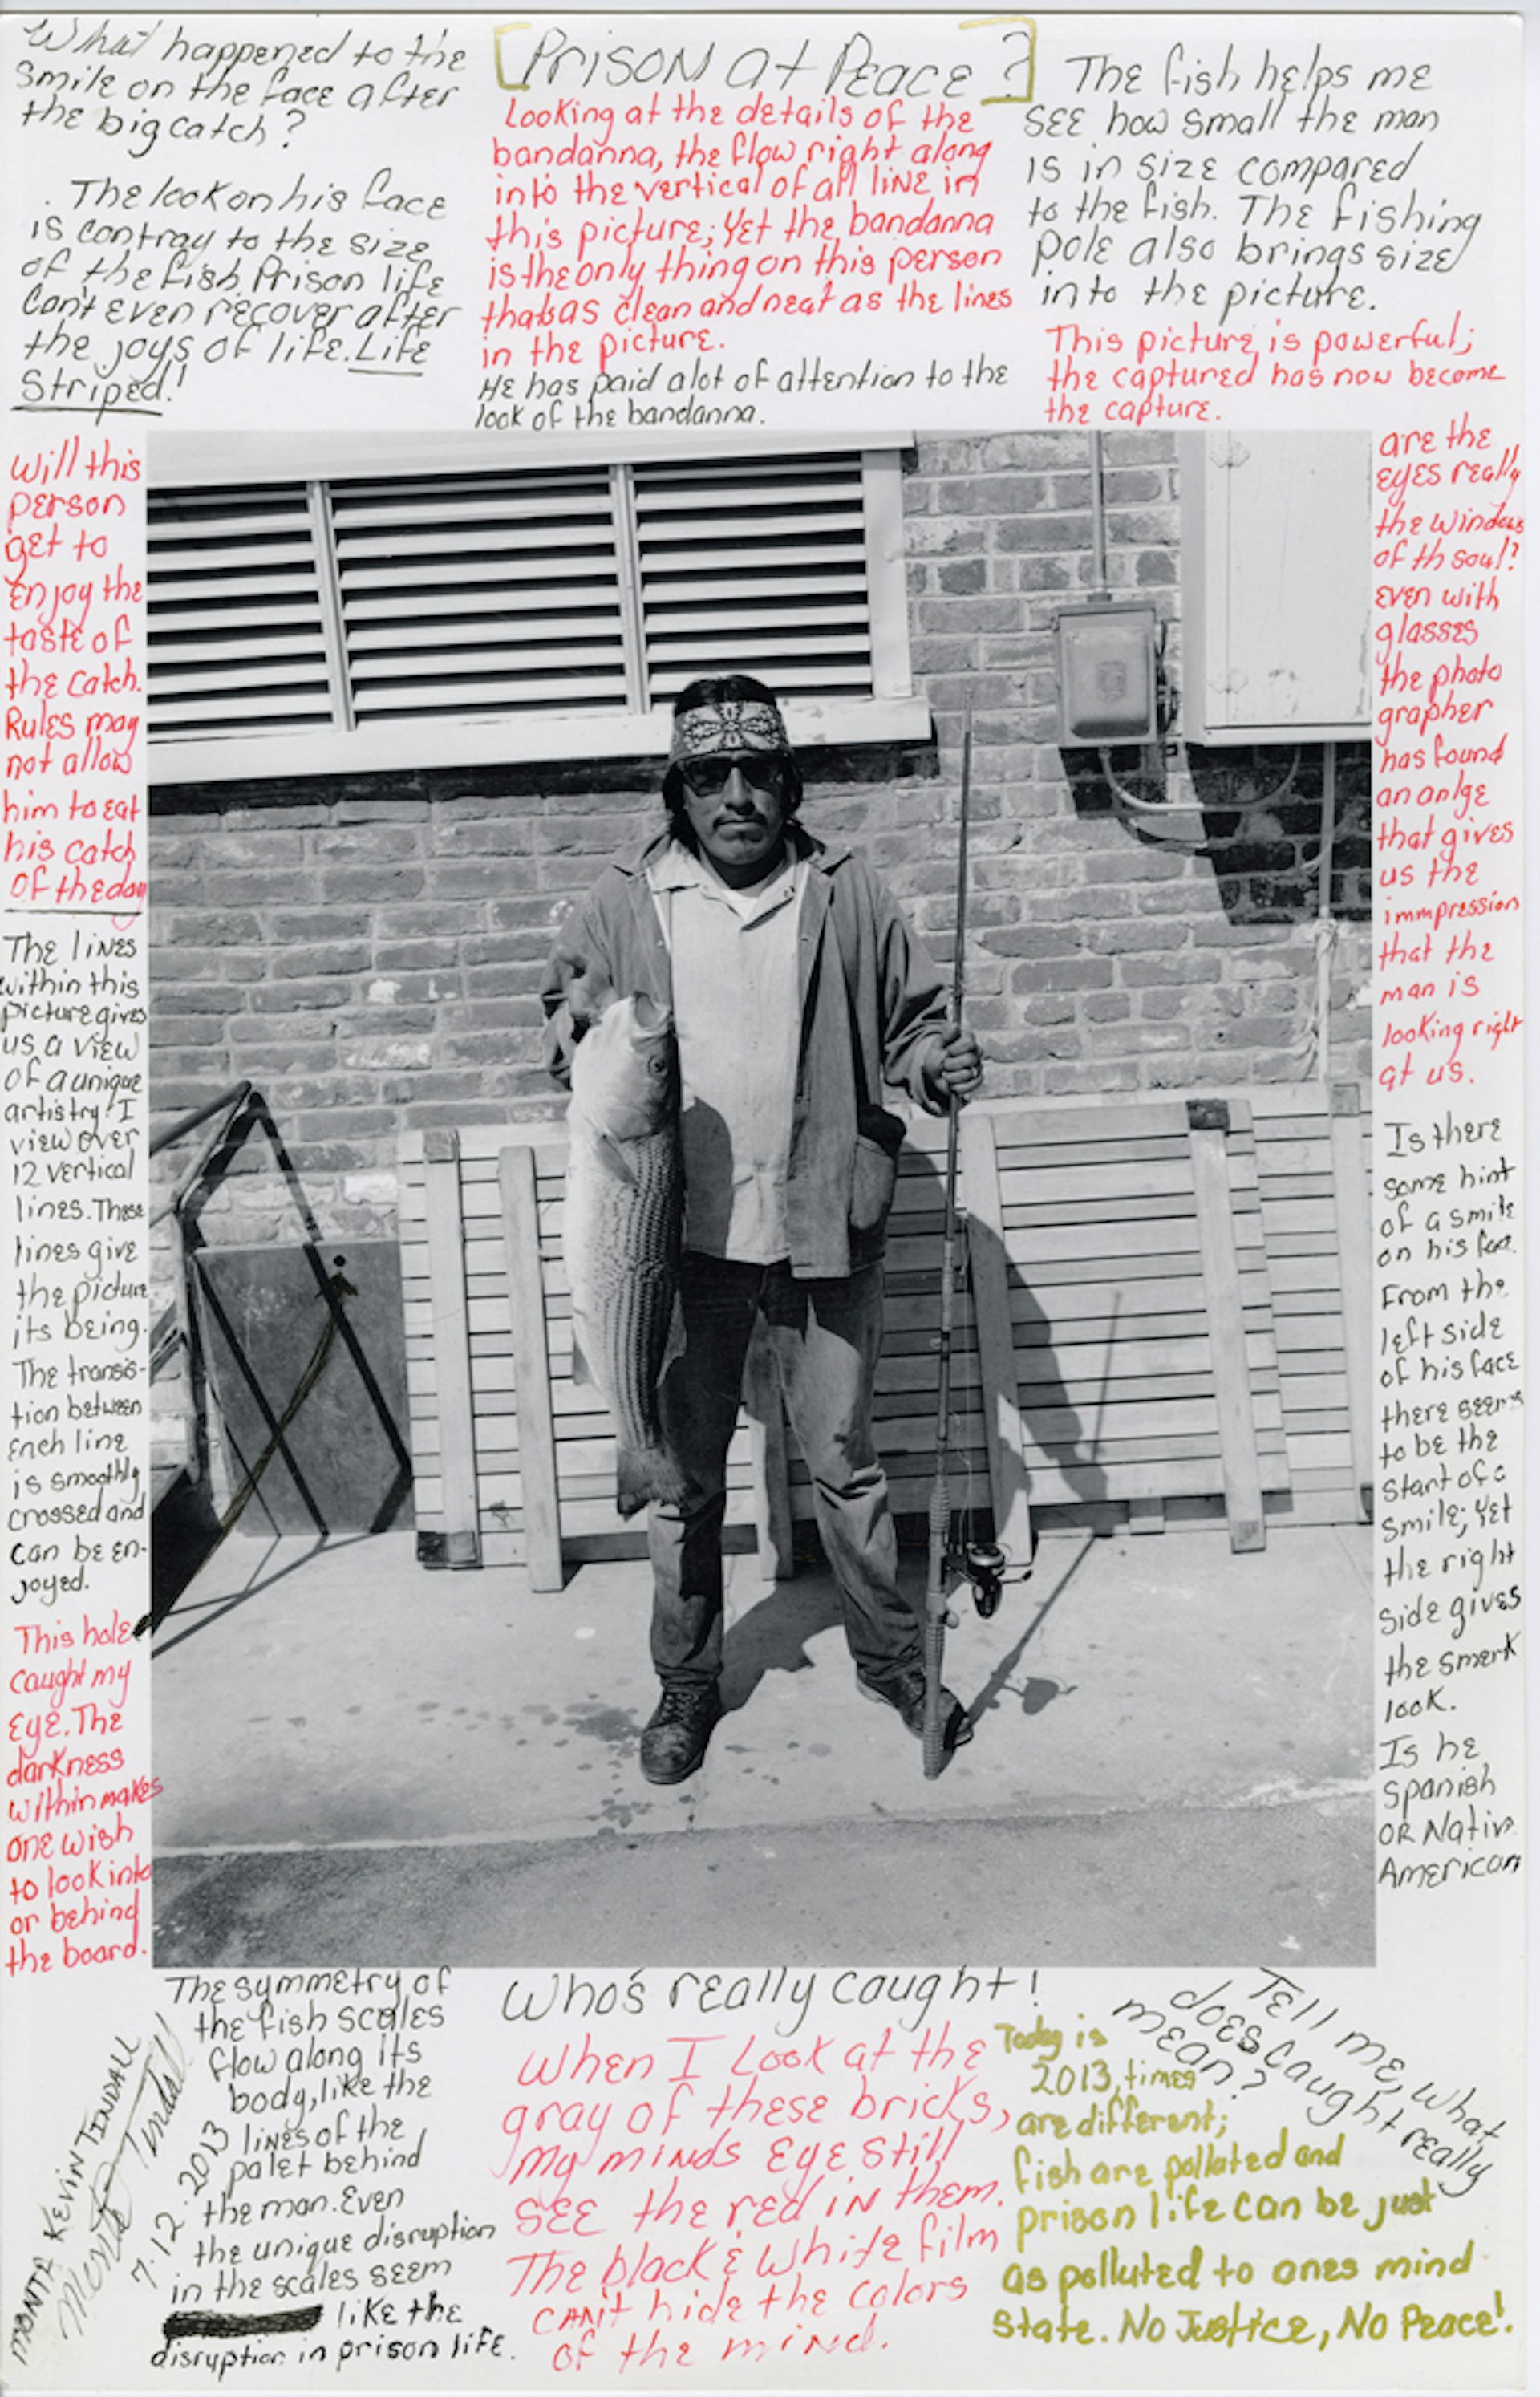 Fish Caught at Ranch 9.17.75 by Kevin Tindall, 2013. Courtesy of Nigel Poor.